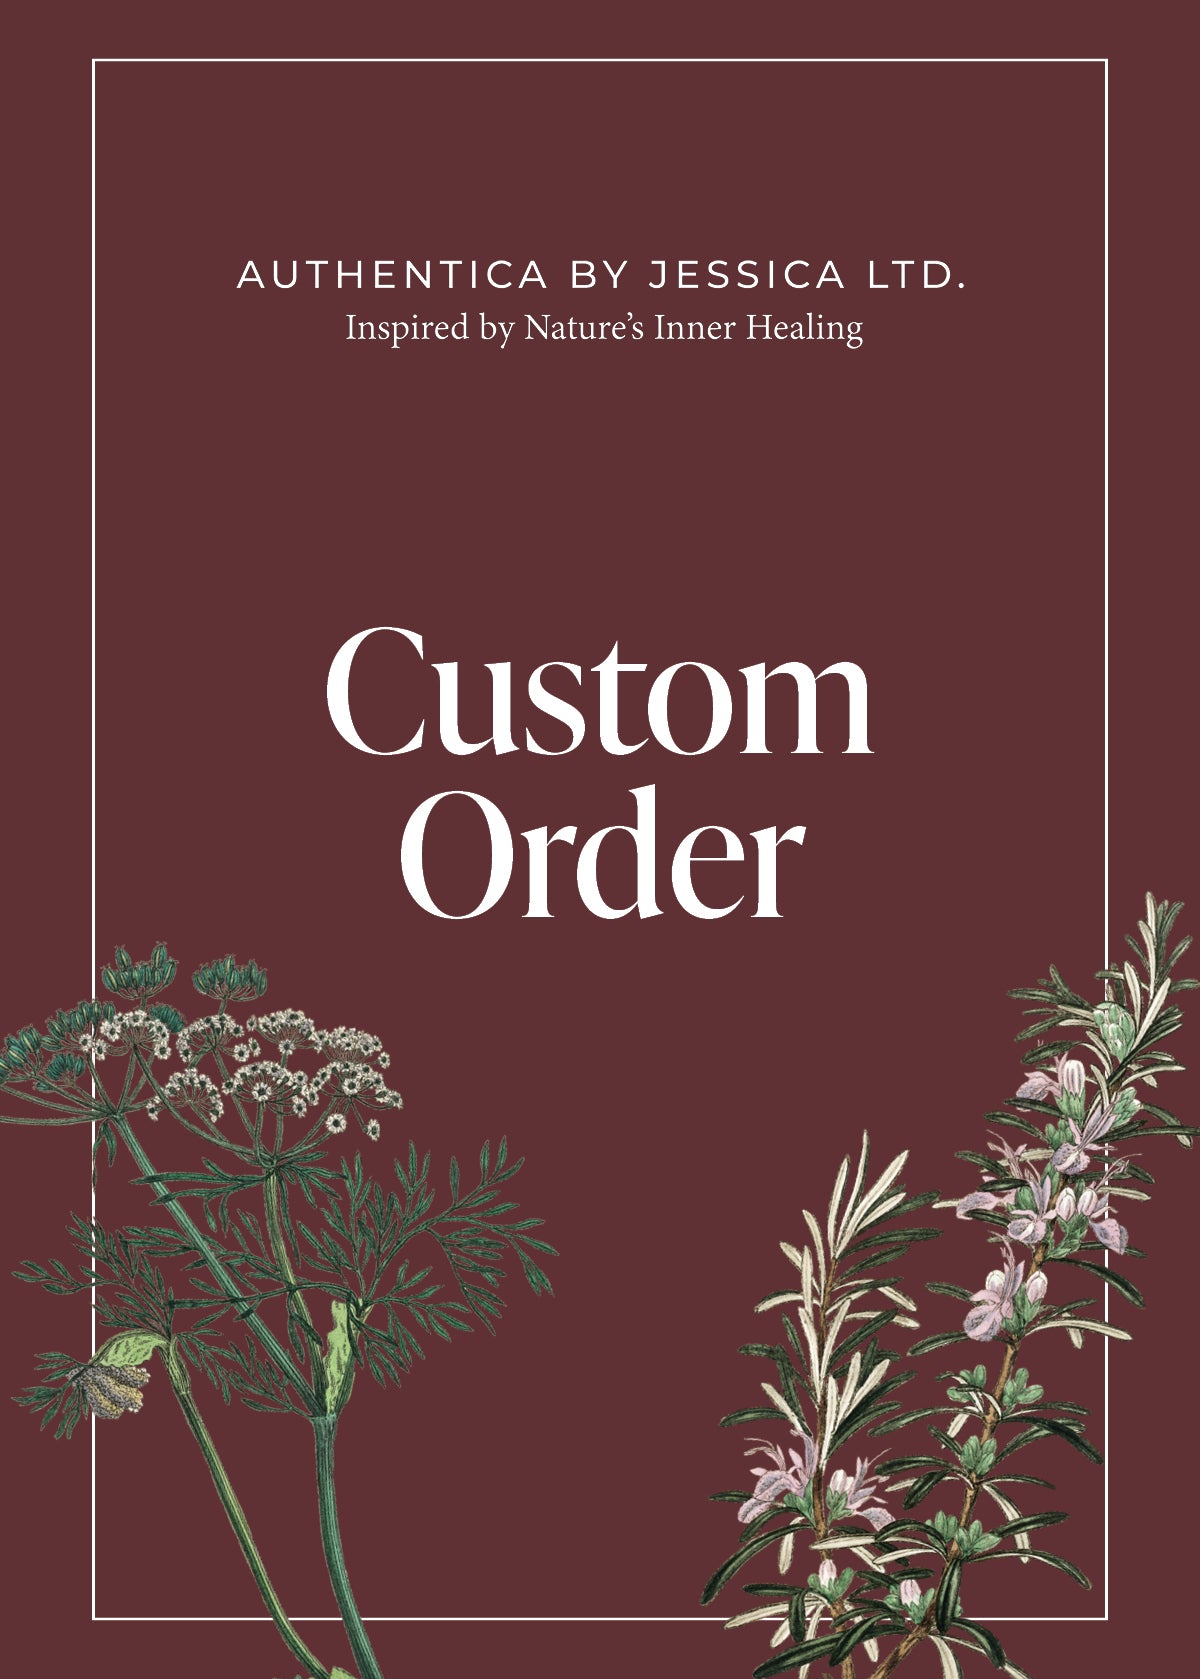 Custom Order Check Out